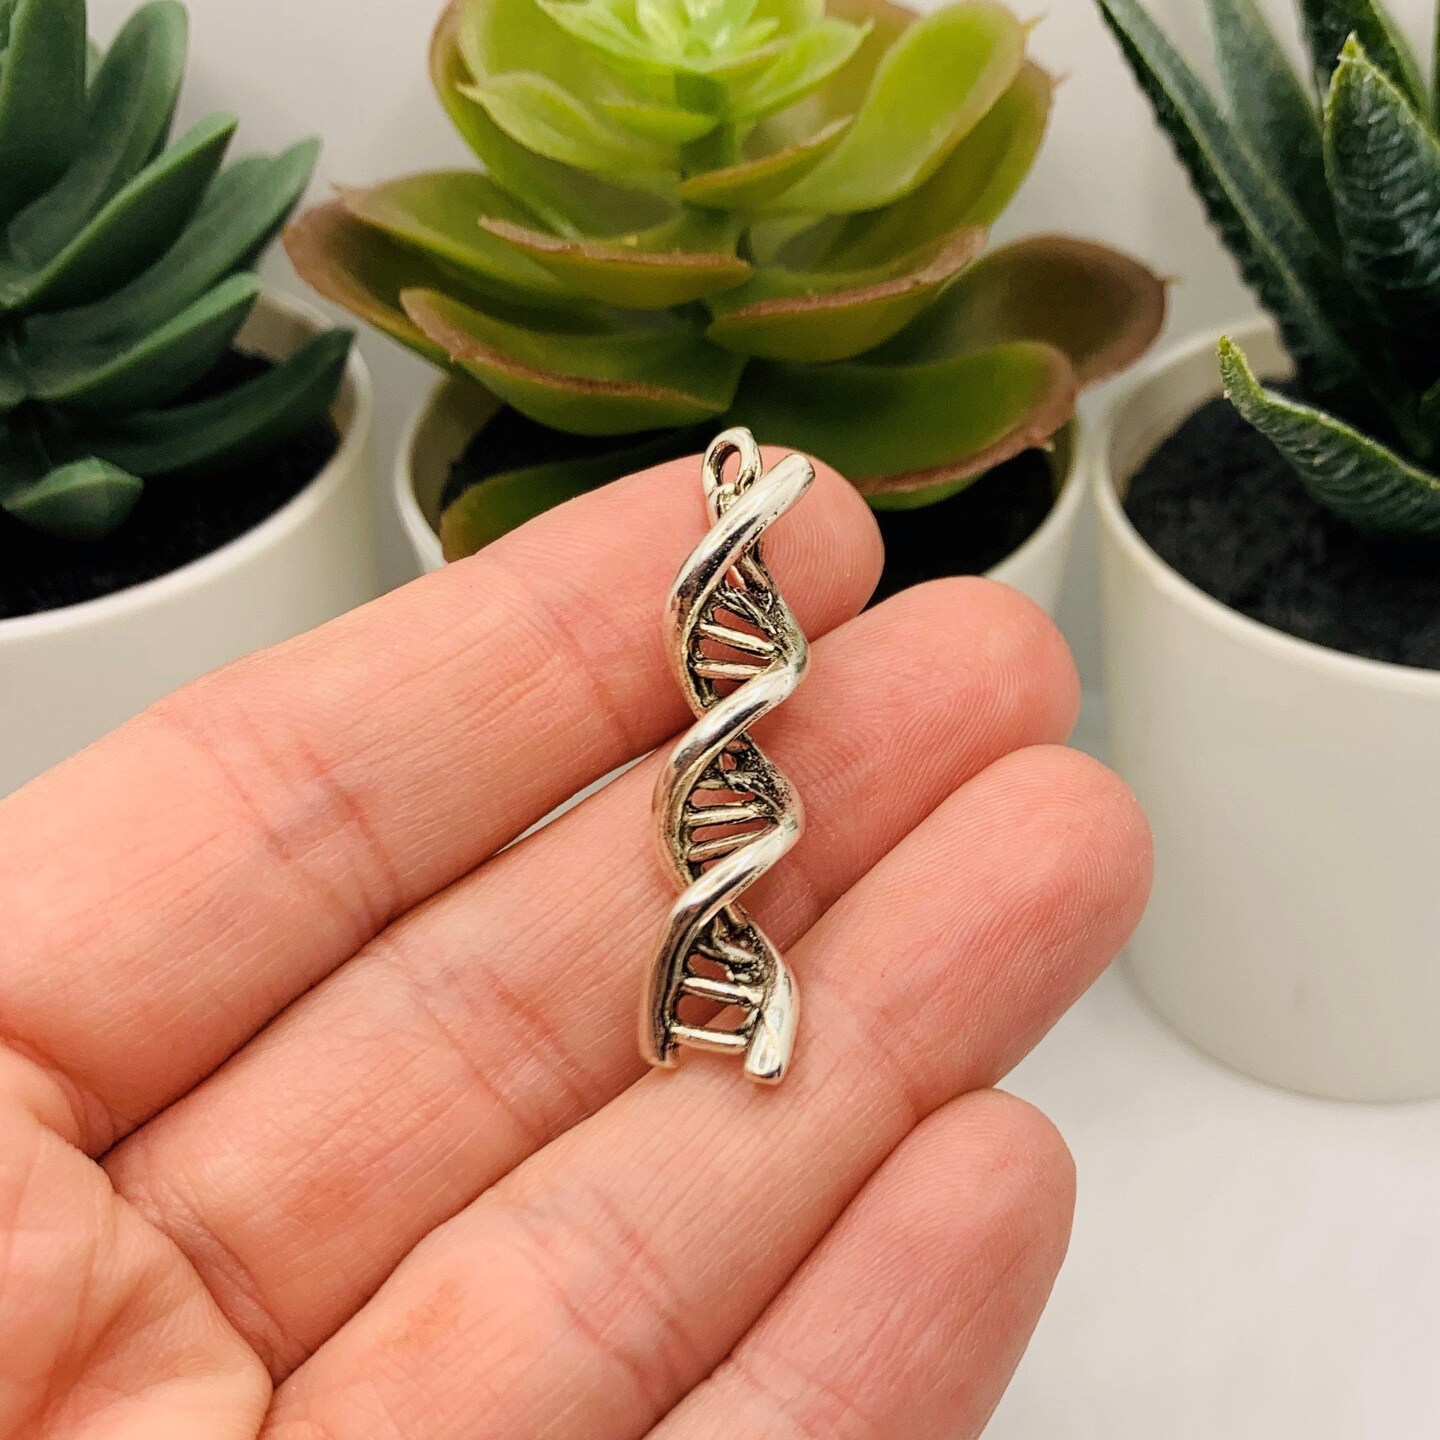 4, 12 or 25 Pieces: Silver DNA Helix Genealogy 3D Pendant Charms